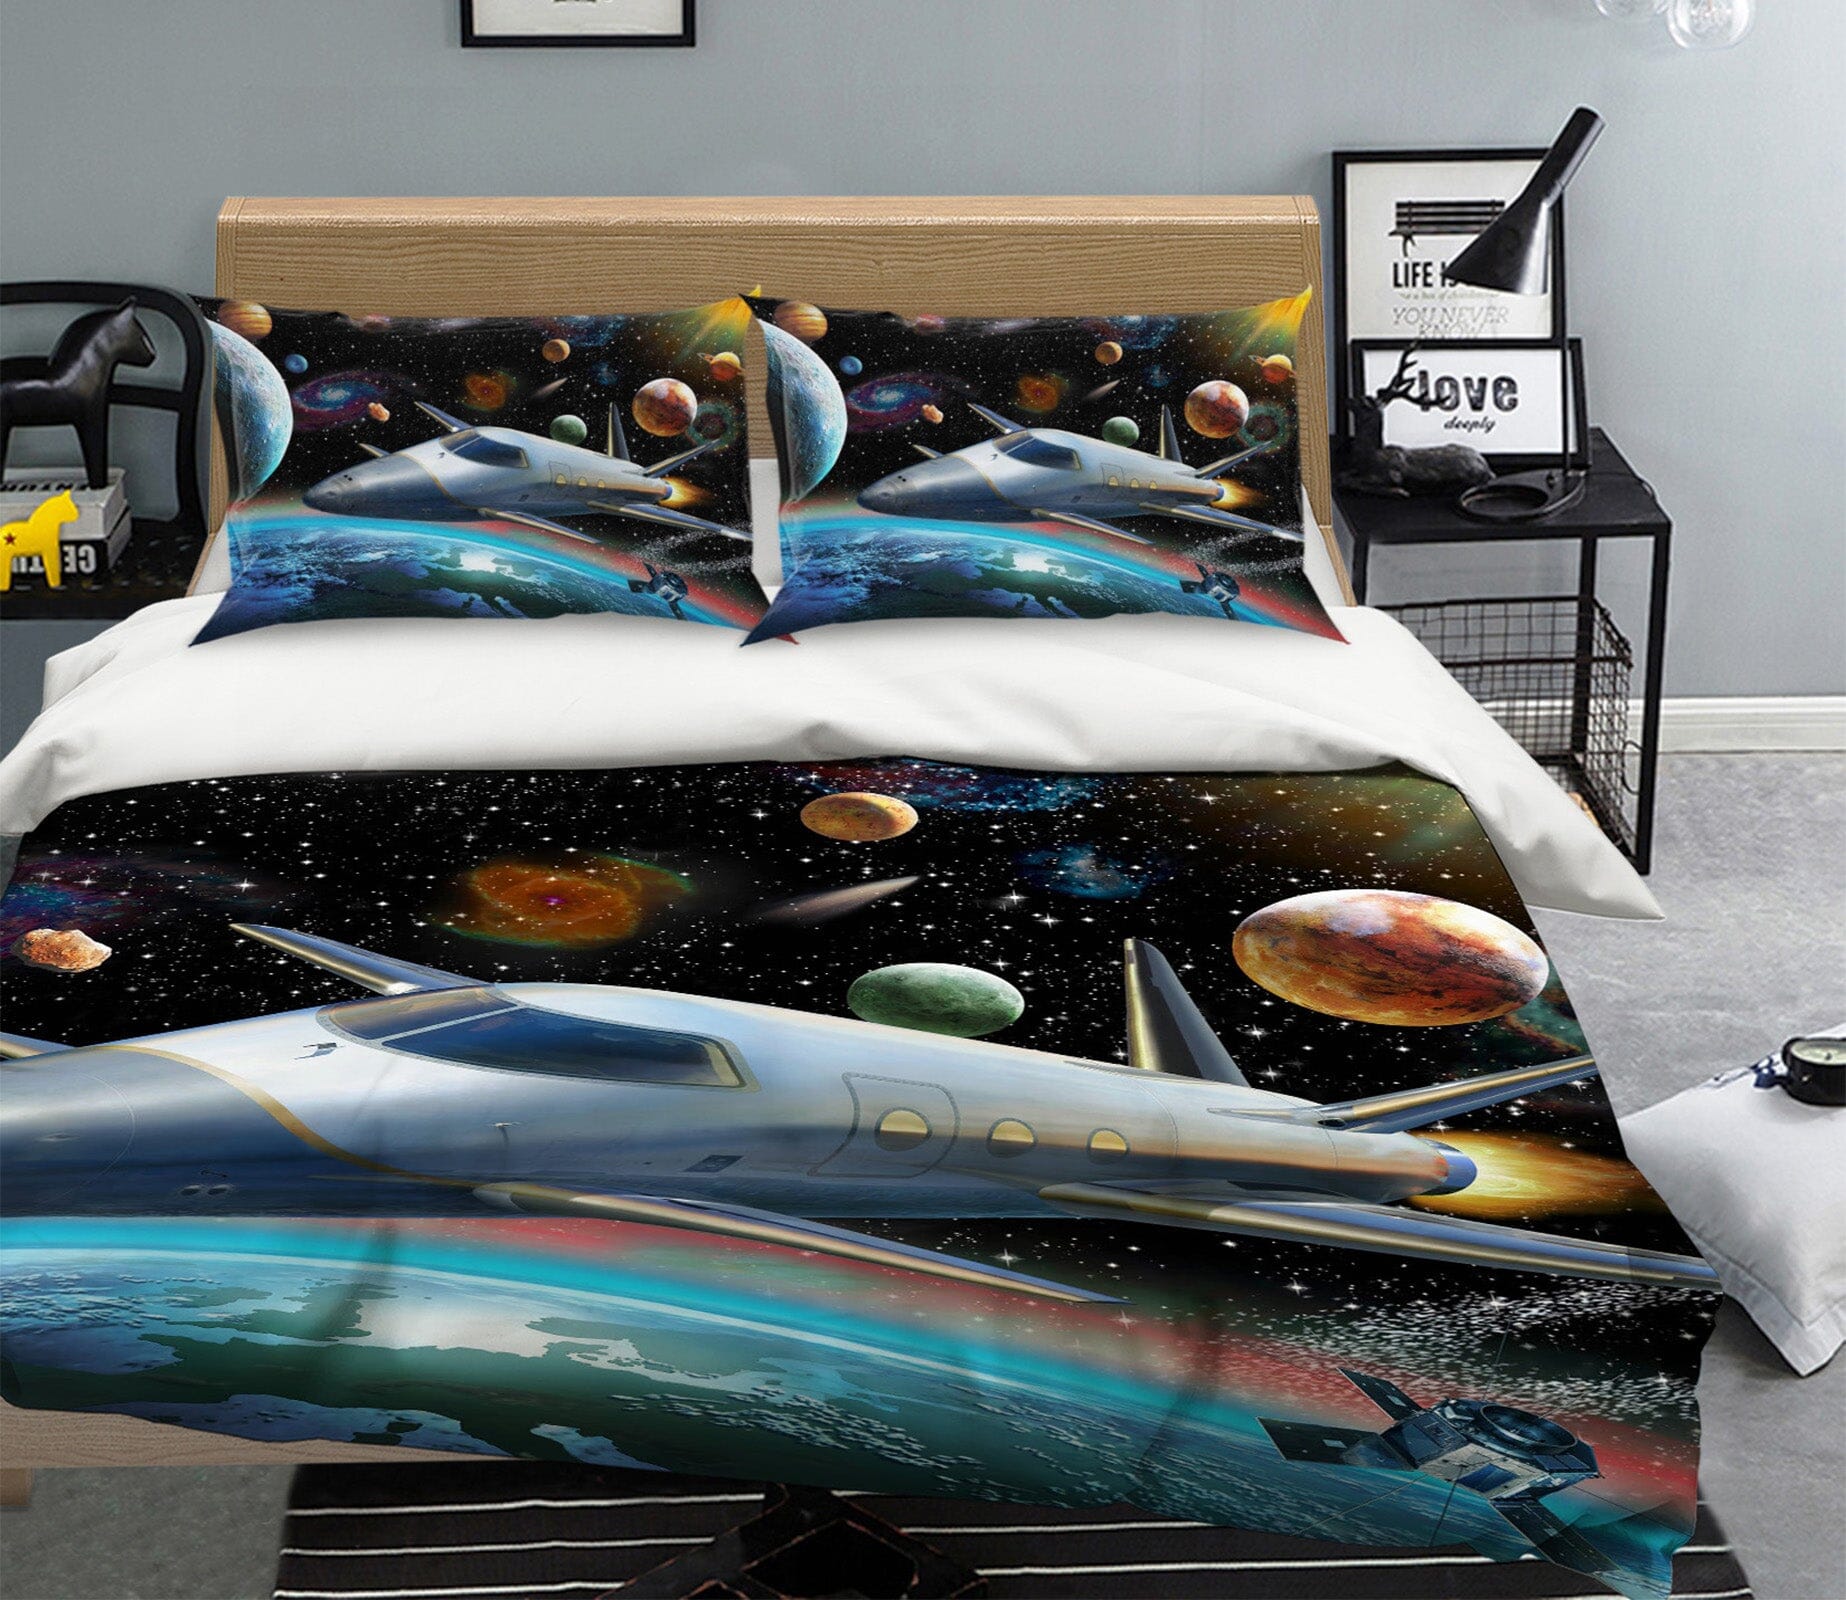 3D Starry Spaceship 2125 Adrian Chesterman Bedding Bed Pillowcases Quilt Quiet Covers AJ Creativity Home 